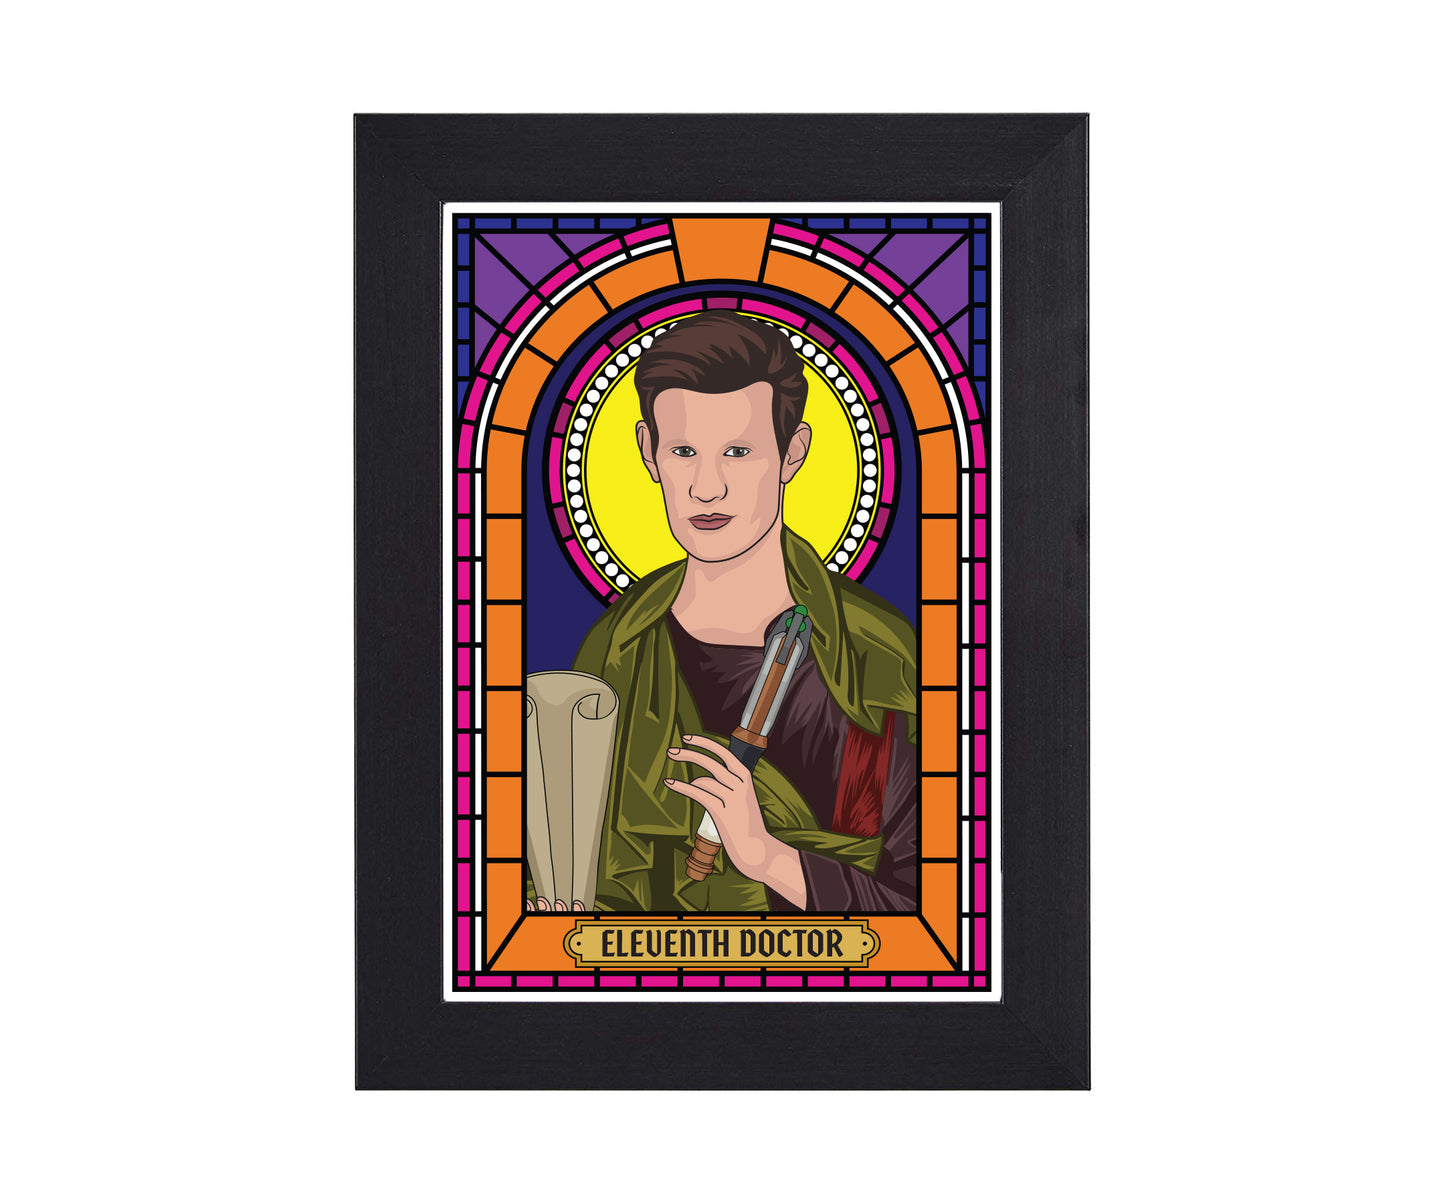 The Doctor Illustrated Saint Print Series